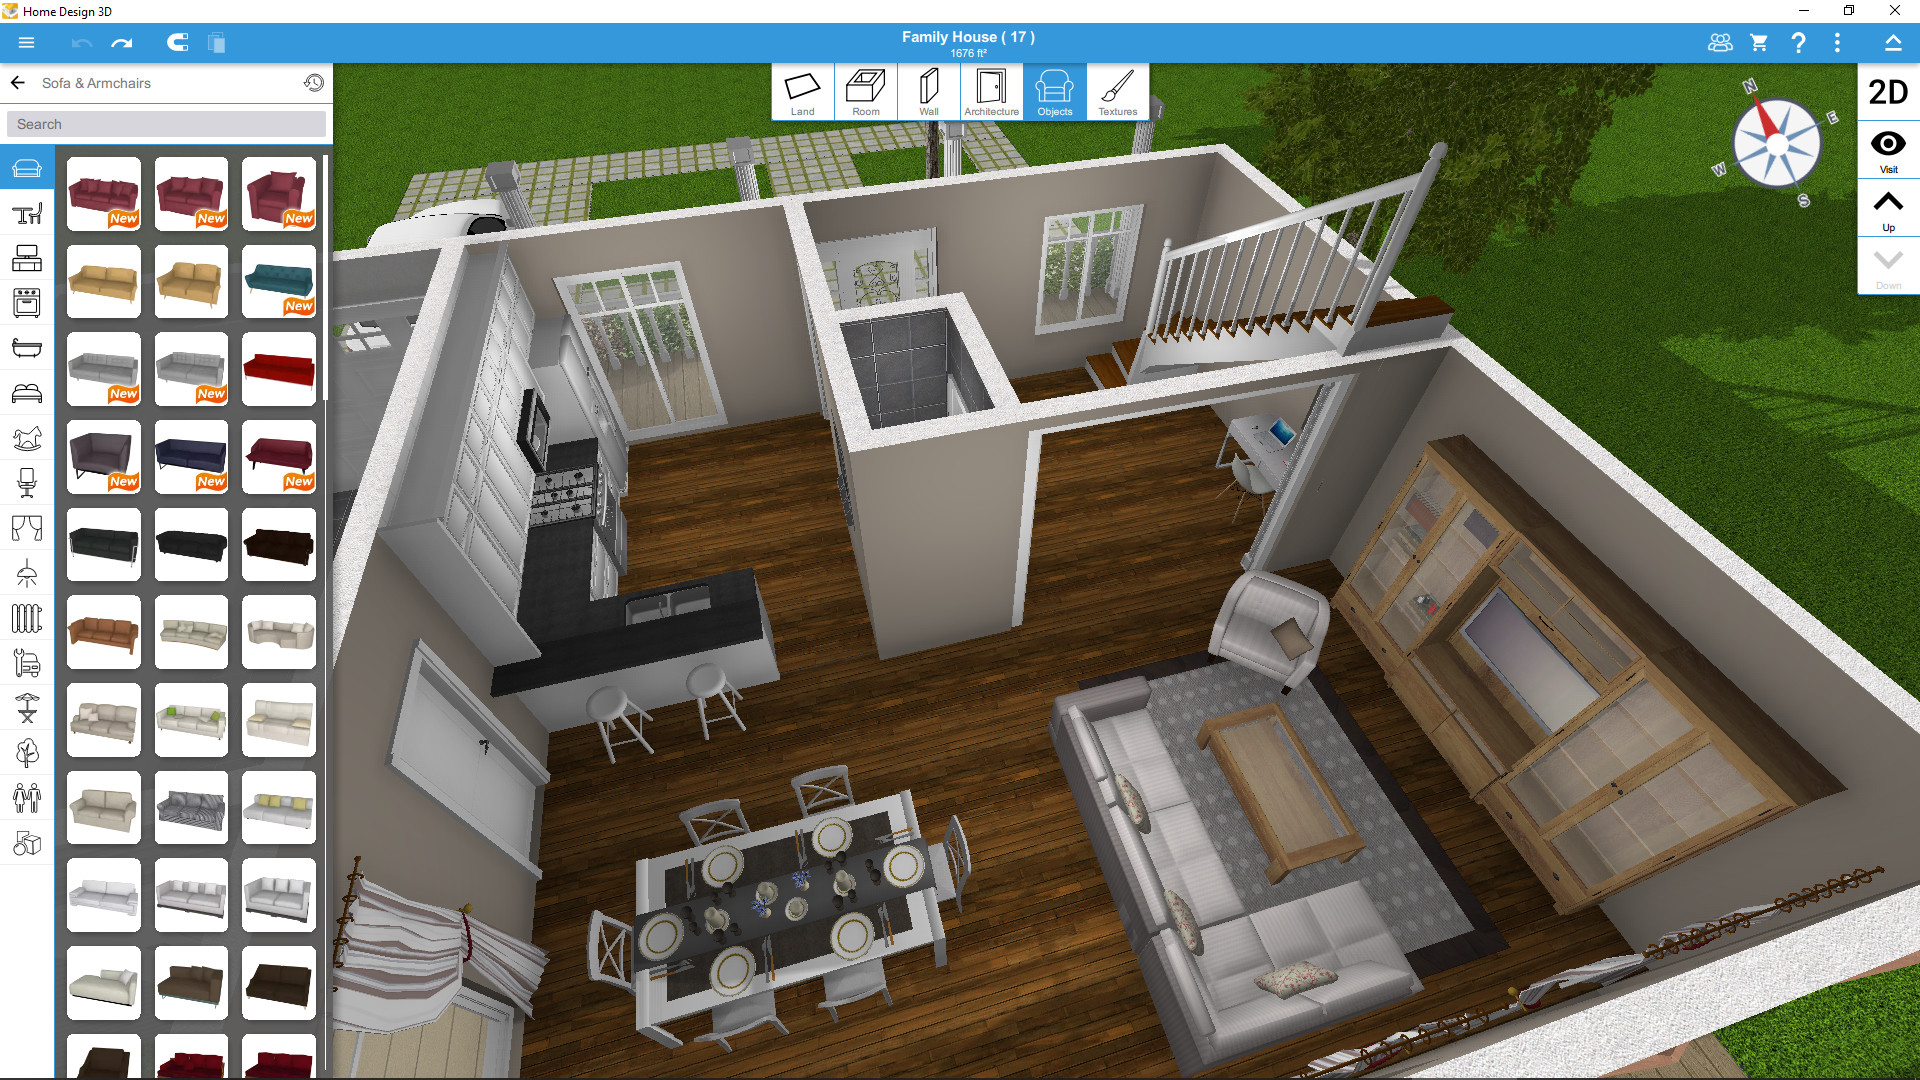 Home Design 3D System Requirements - Can I Run It? - PCGameBenchmark